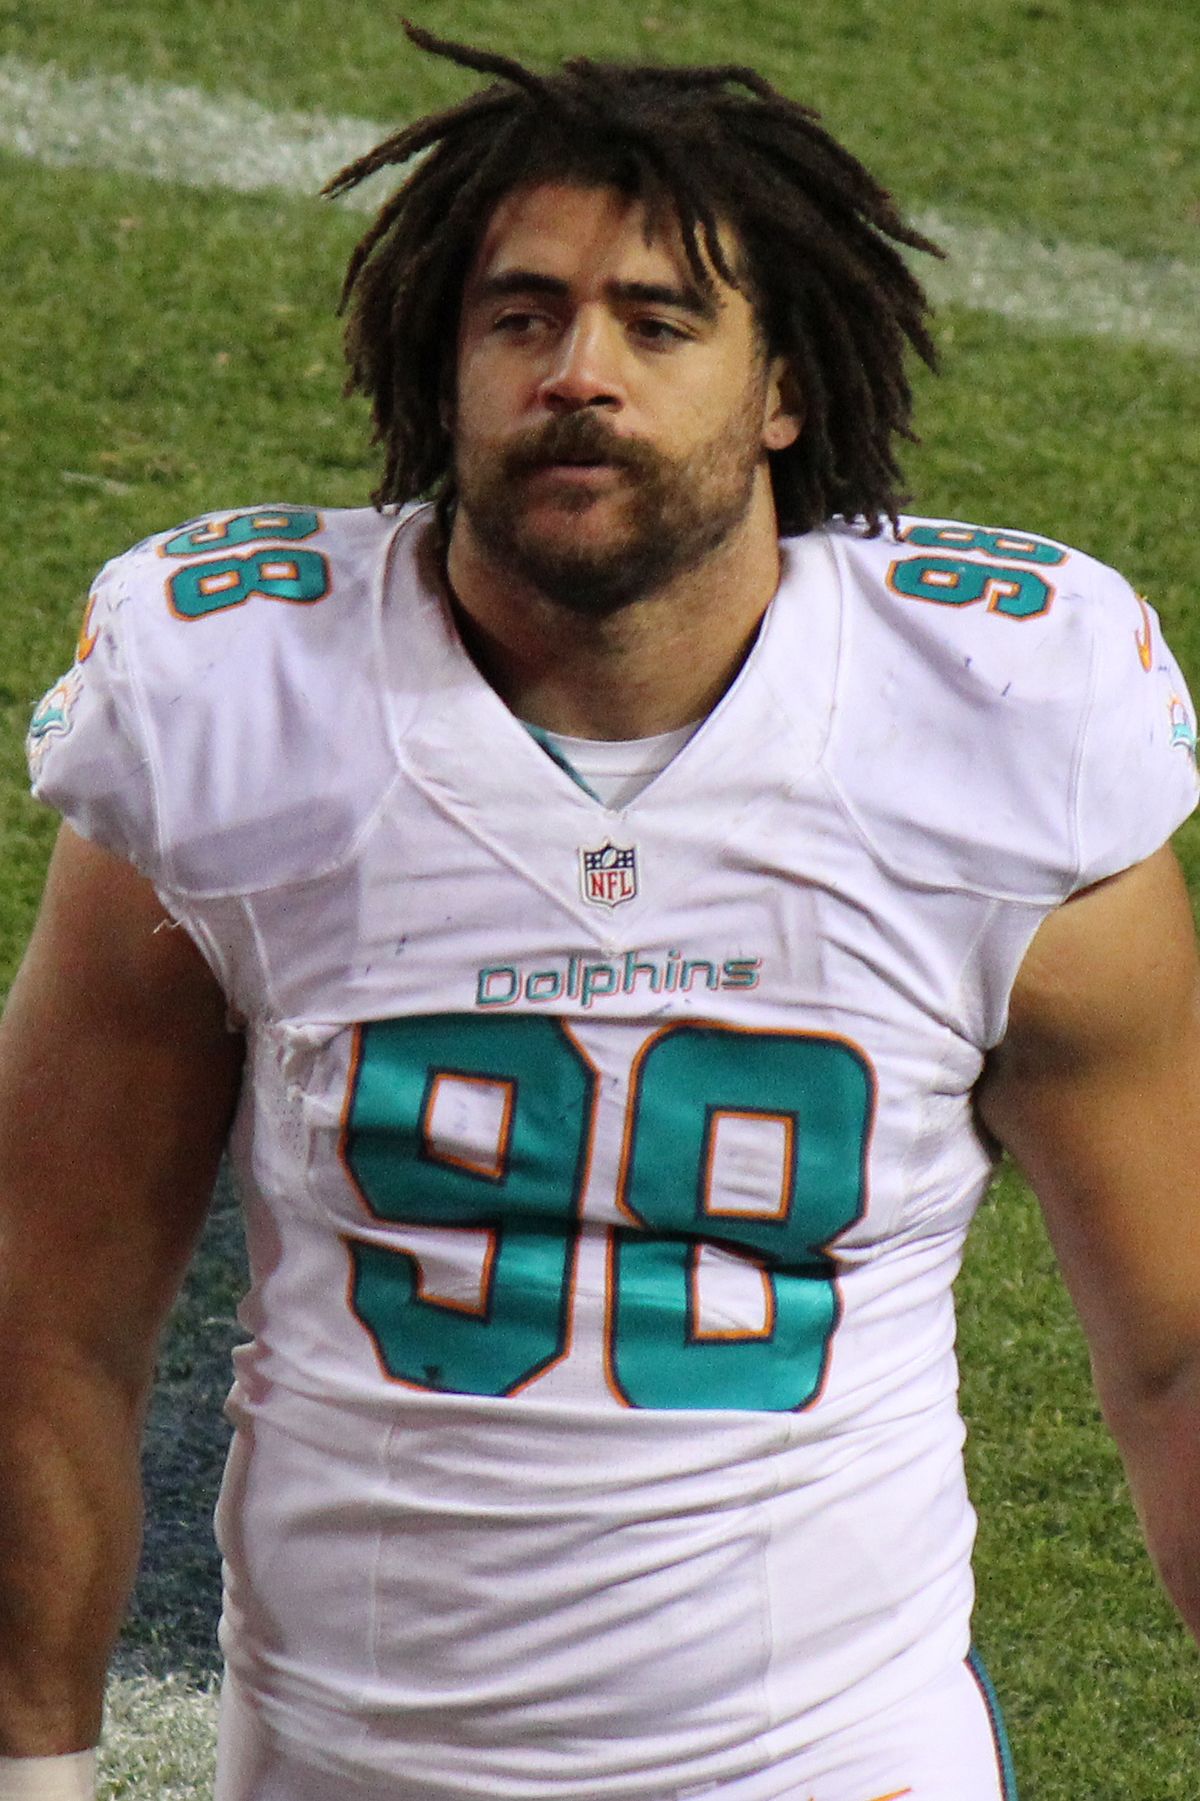 Dolphins jersey number 28